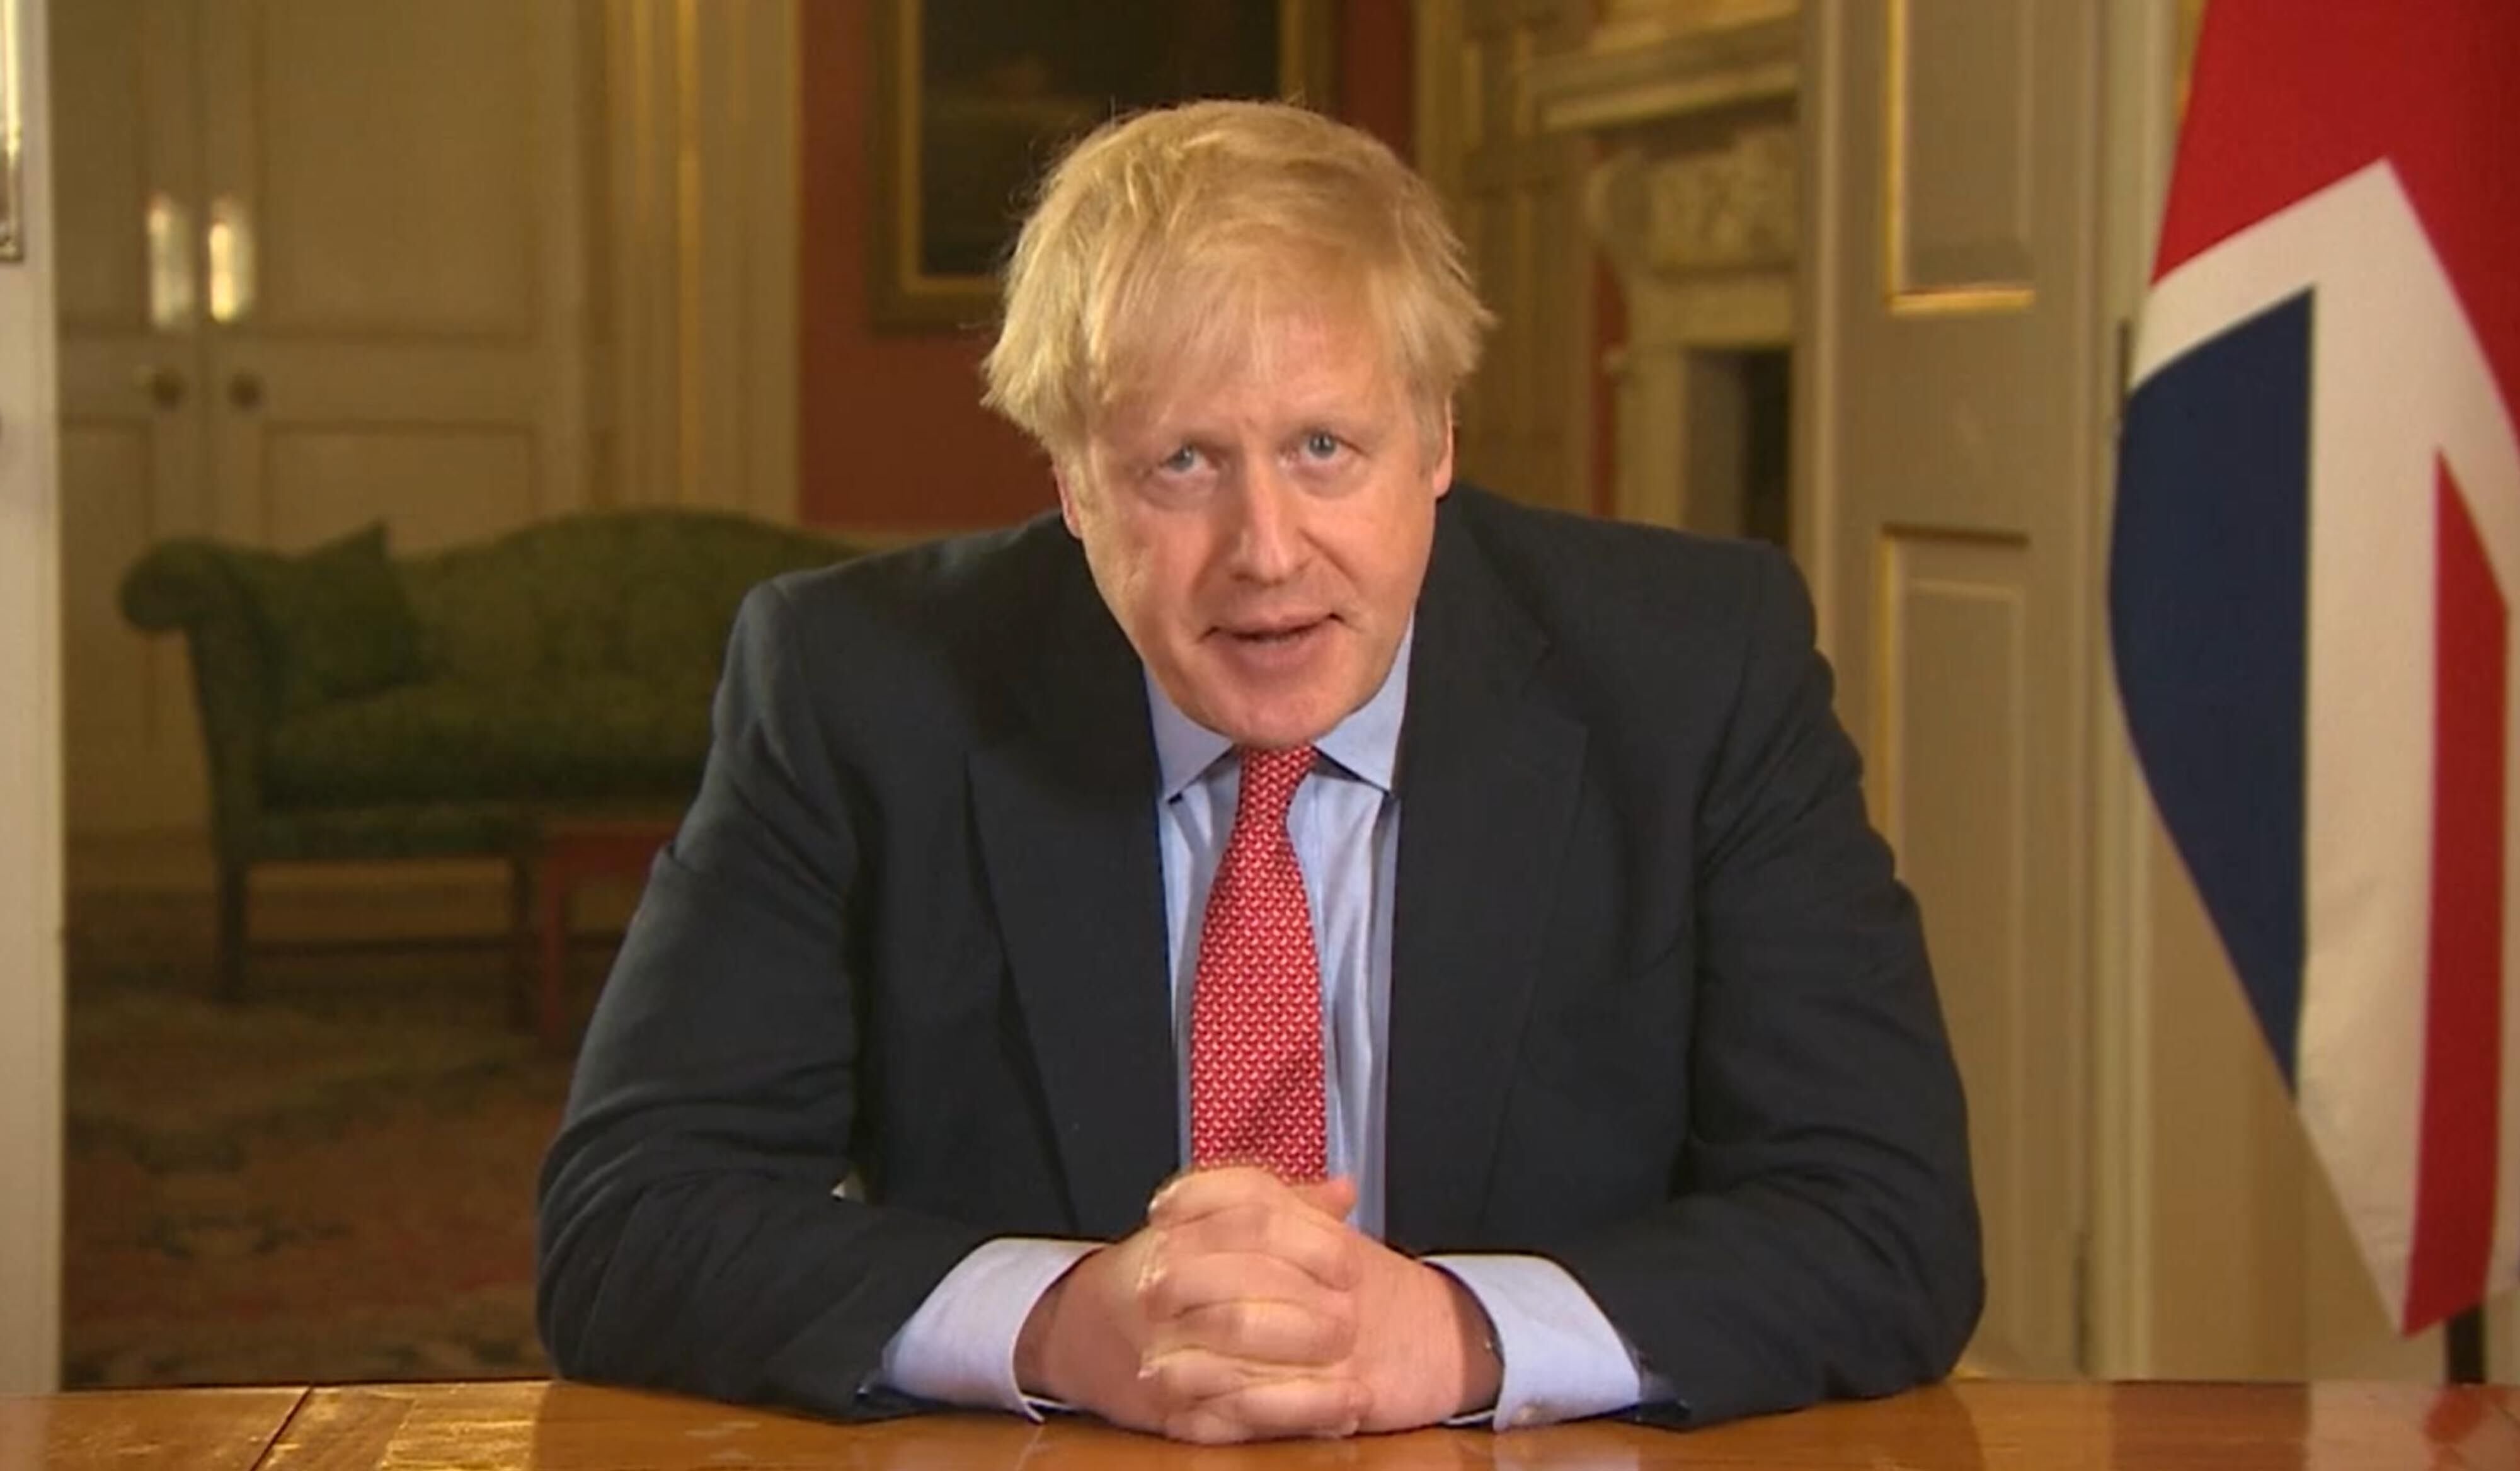 Prime Minister Boris Johnson addressing the nation from 10 Downing Street, London, as he placed the UK on lockdown as the Government seeks to stop the spread of coronavirus (COVID-19) | Photo: Getty Images